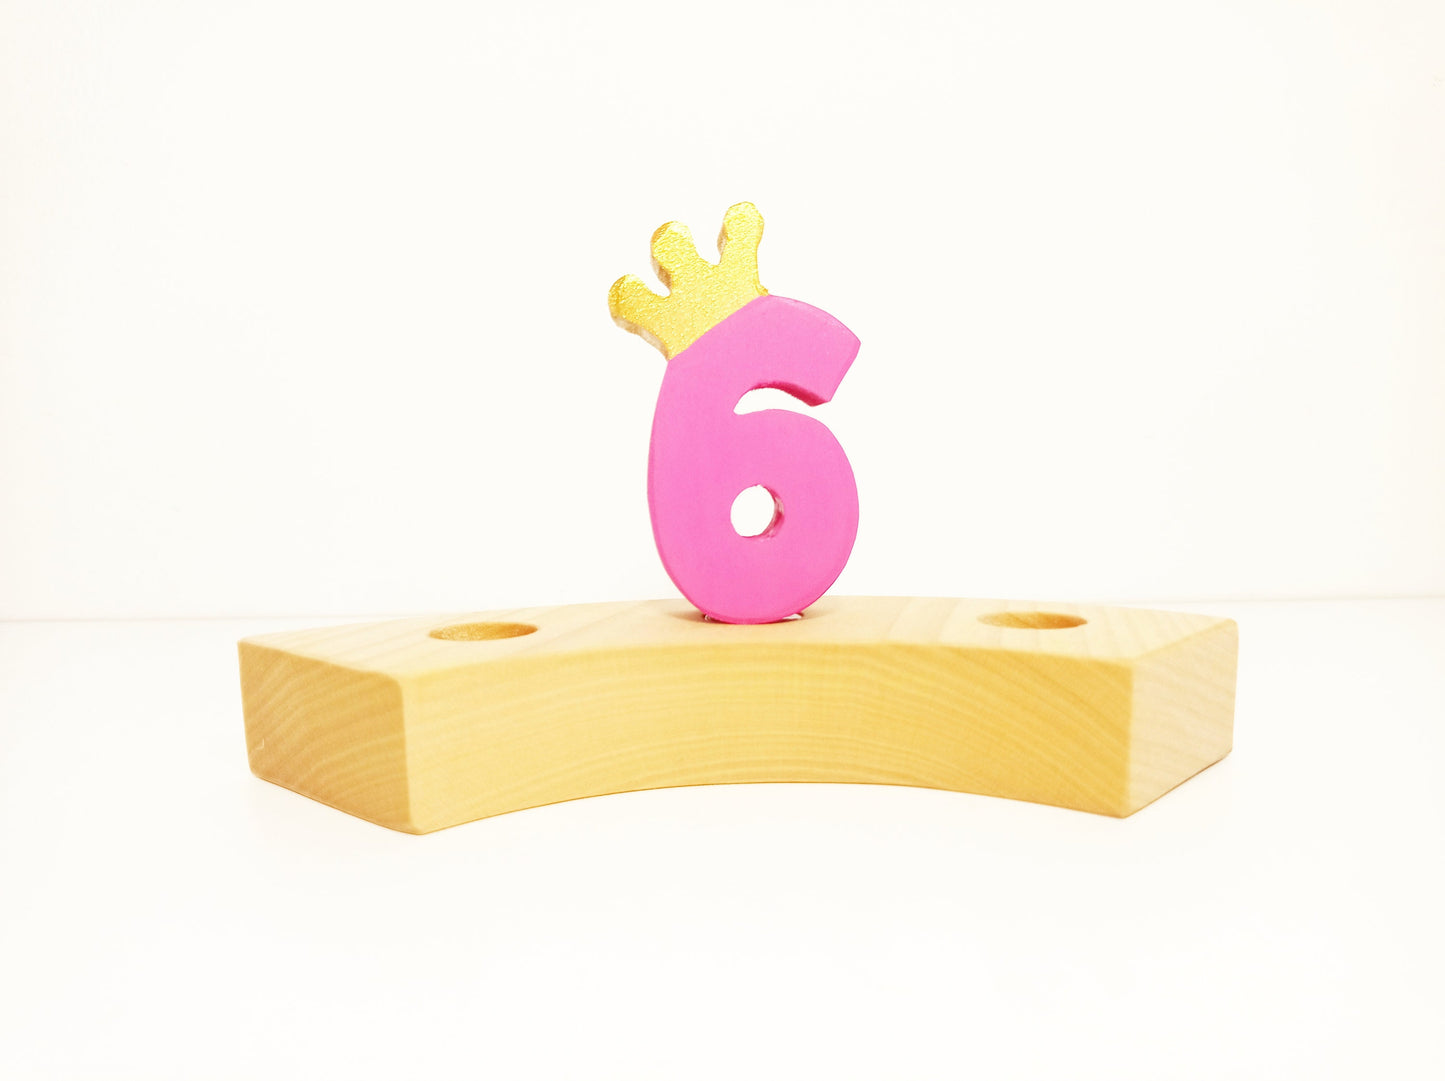 Number 6 birthday ring ornament, waldorf ring ornament, waldorf decoration, birthday ring, birthday decorations, waldorf numbers, jaar ring